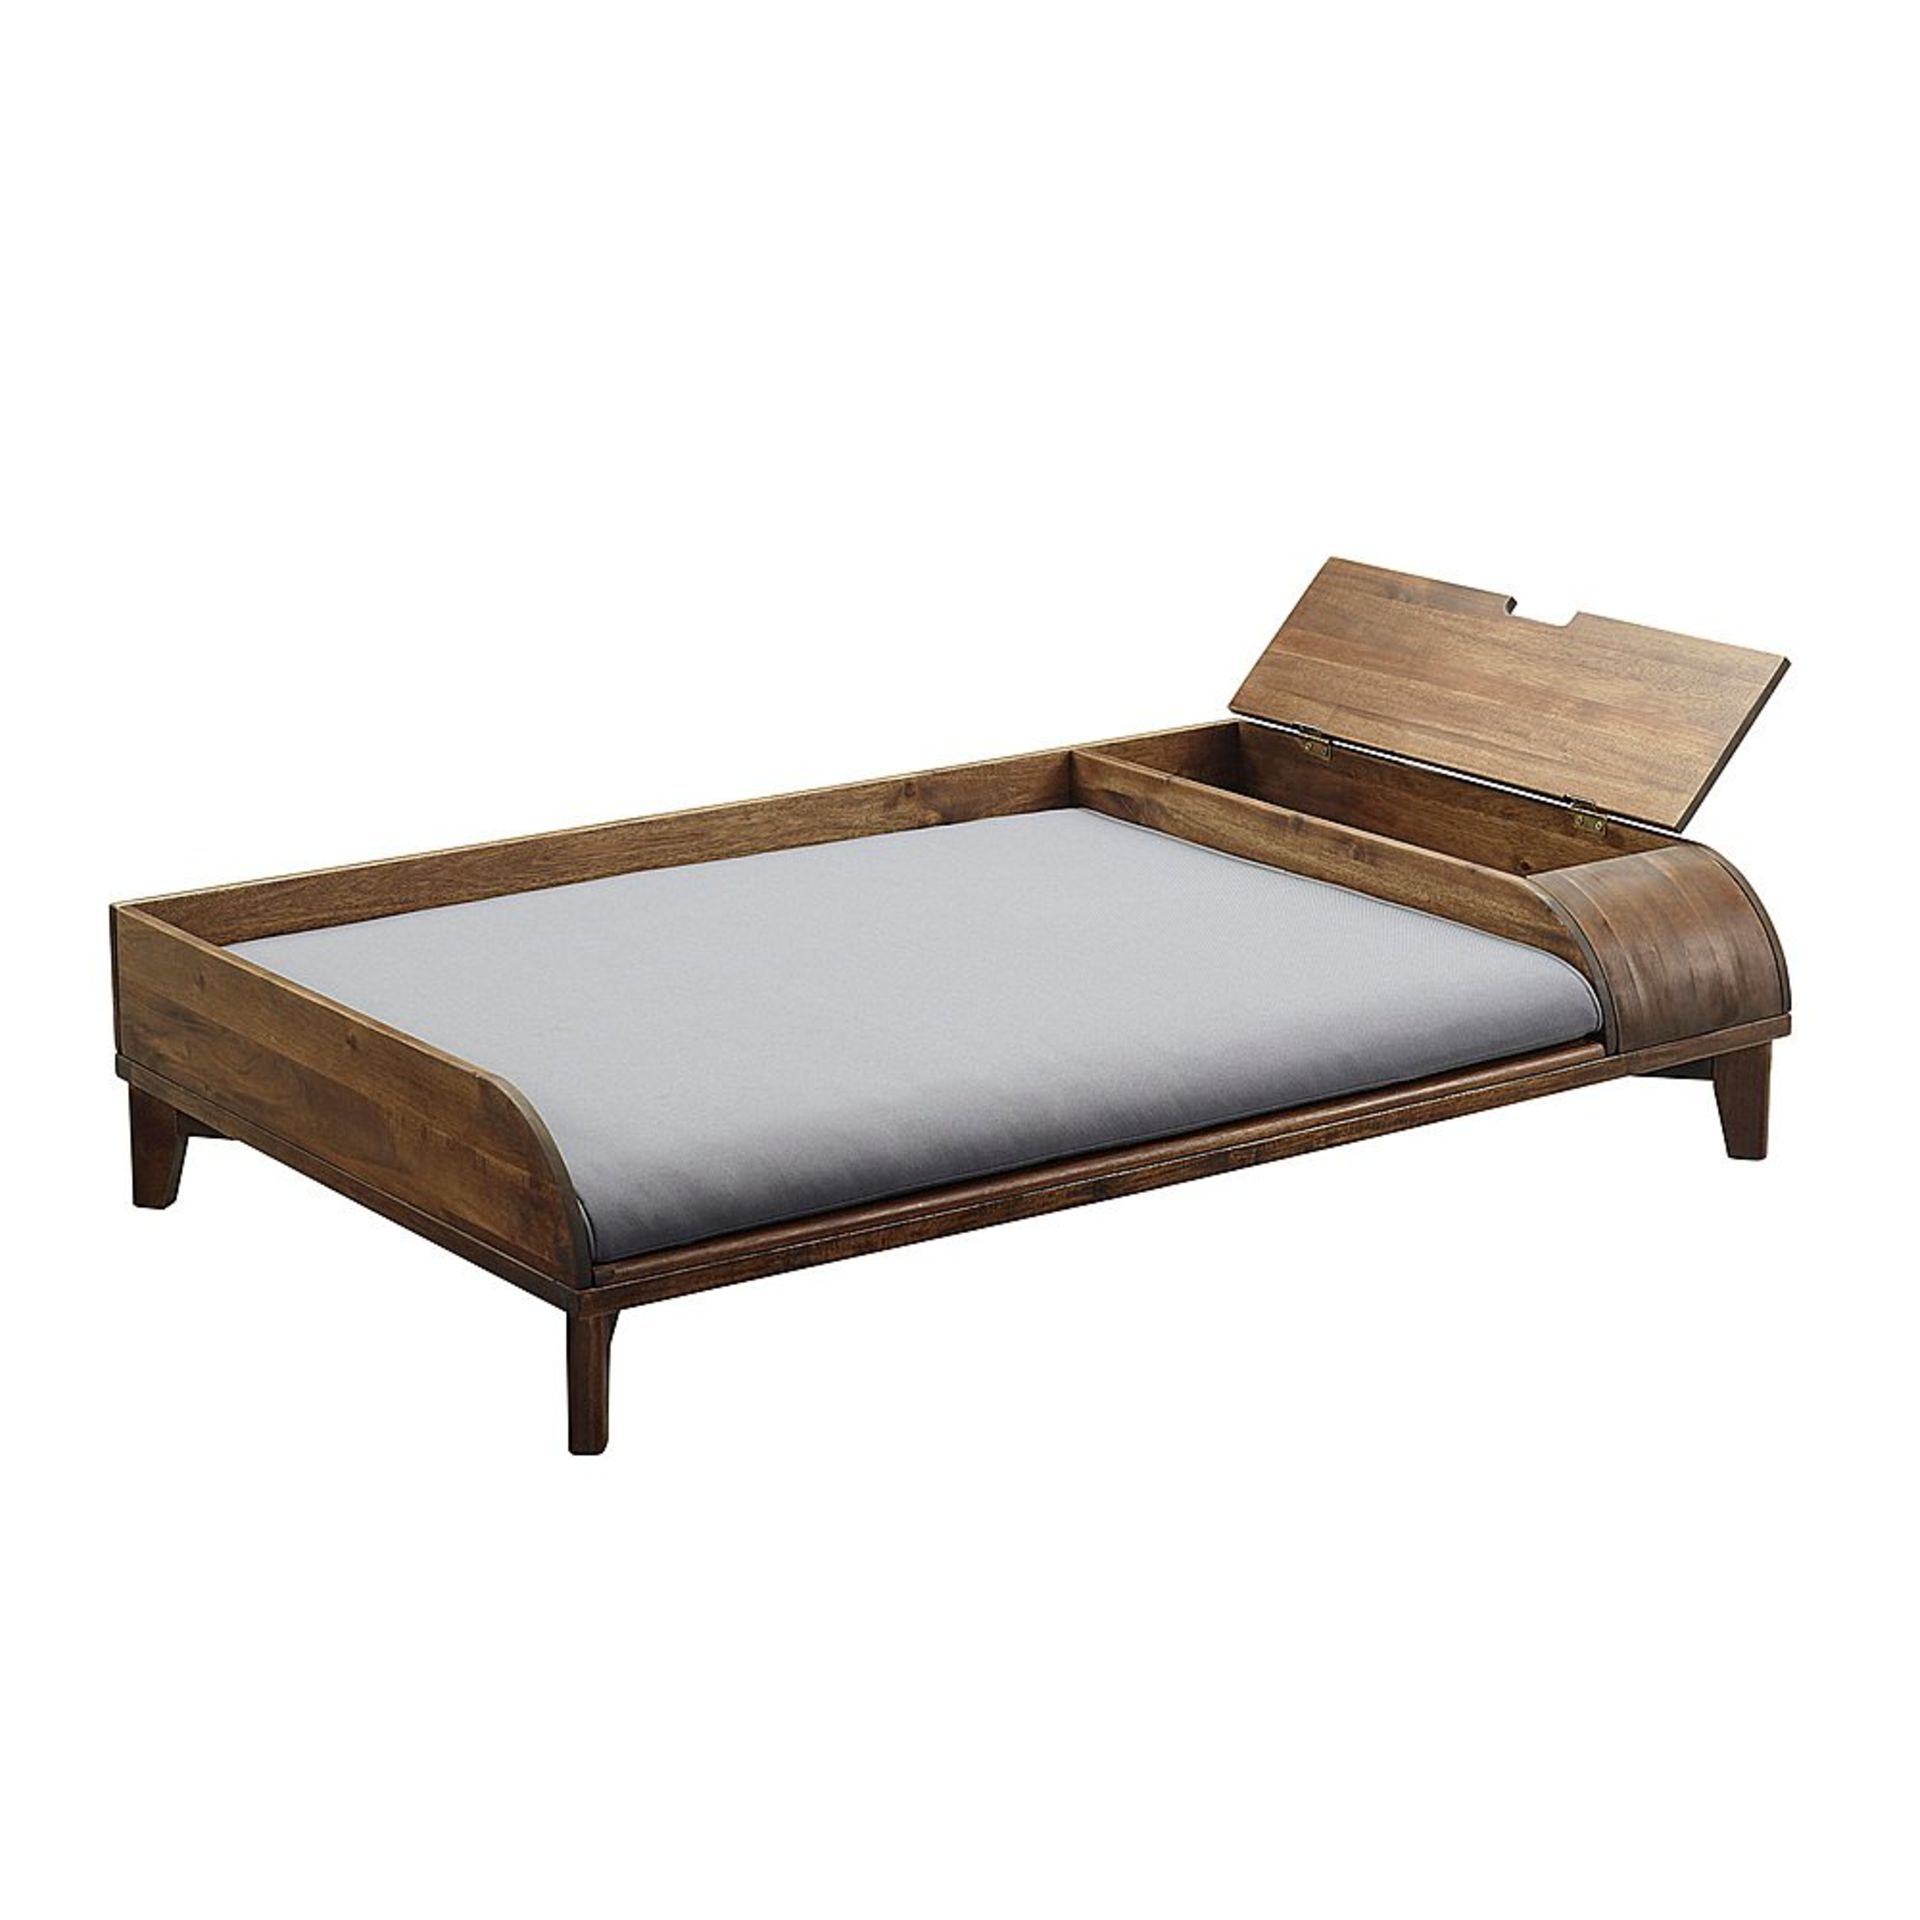 SOLID WOOD STORAGE PED BED WITH CUSHION IN DARK BROWN/GREY - RRP £245 - Image 4 of 7